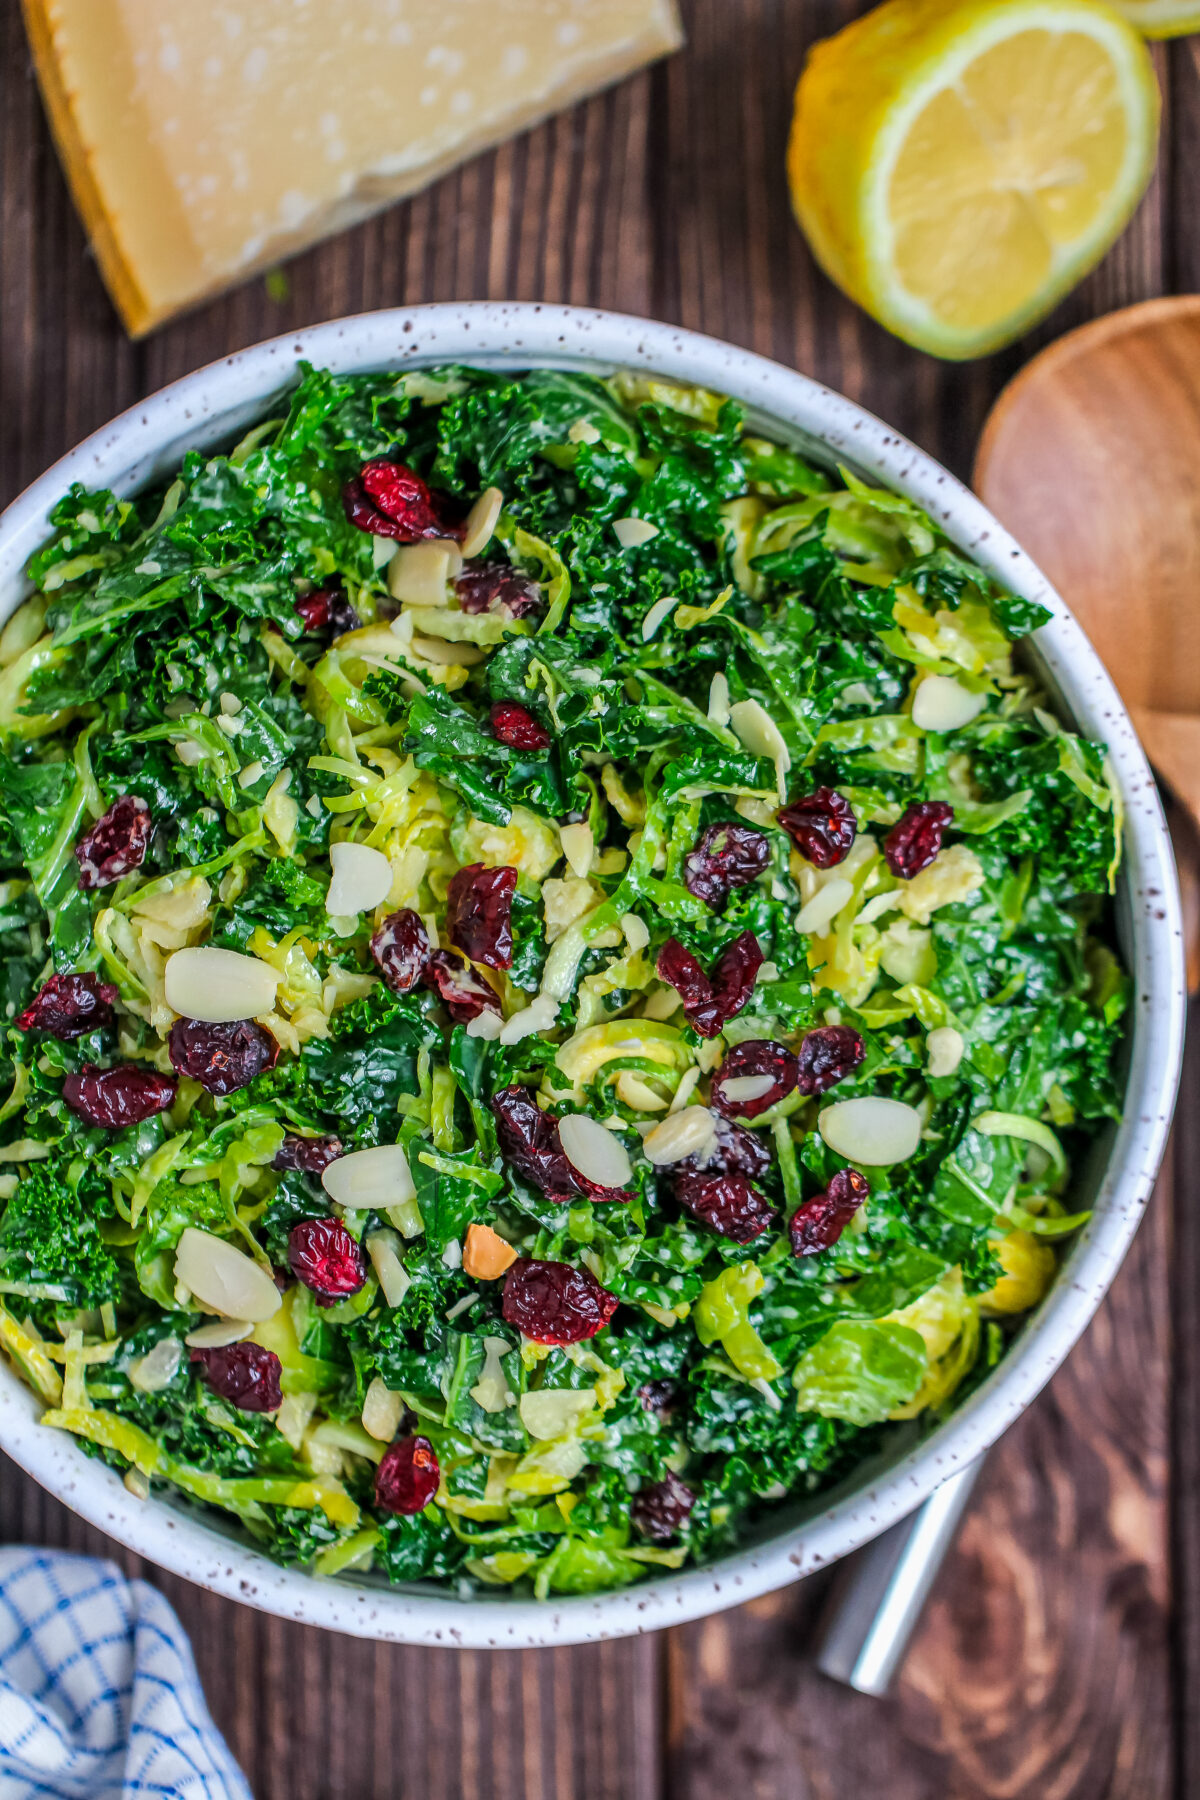 Whip up a tasty Kale and Brussels Sprout Salad with our simple recipe and add a fresh, healthy twist to your meals.